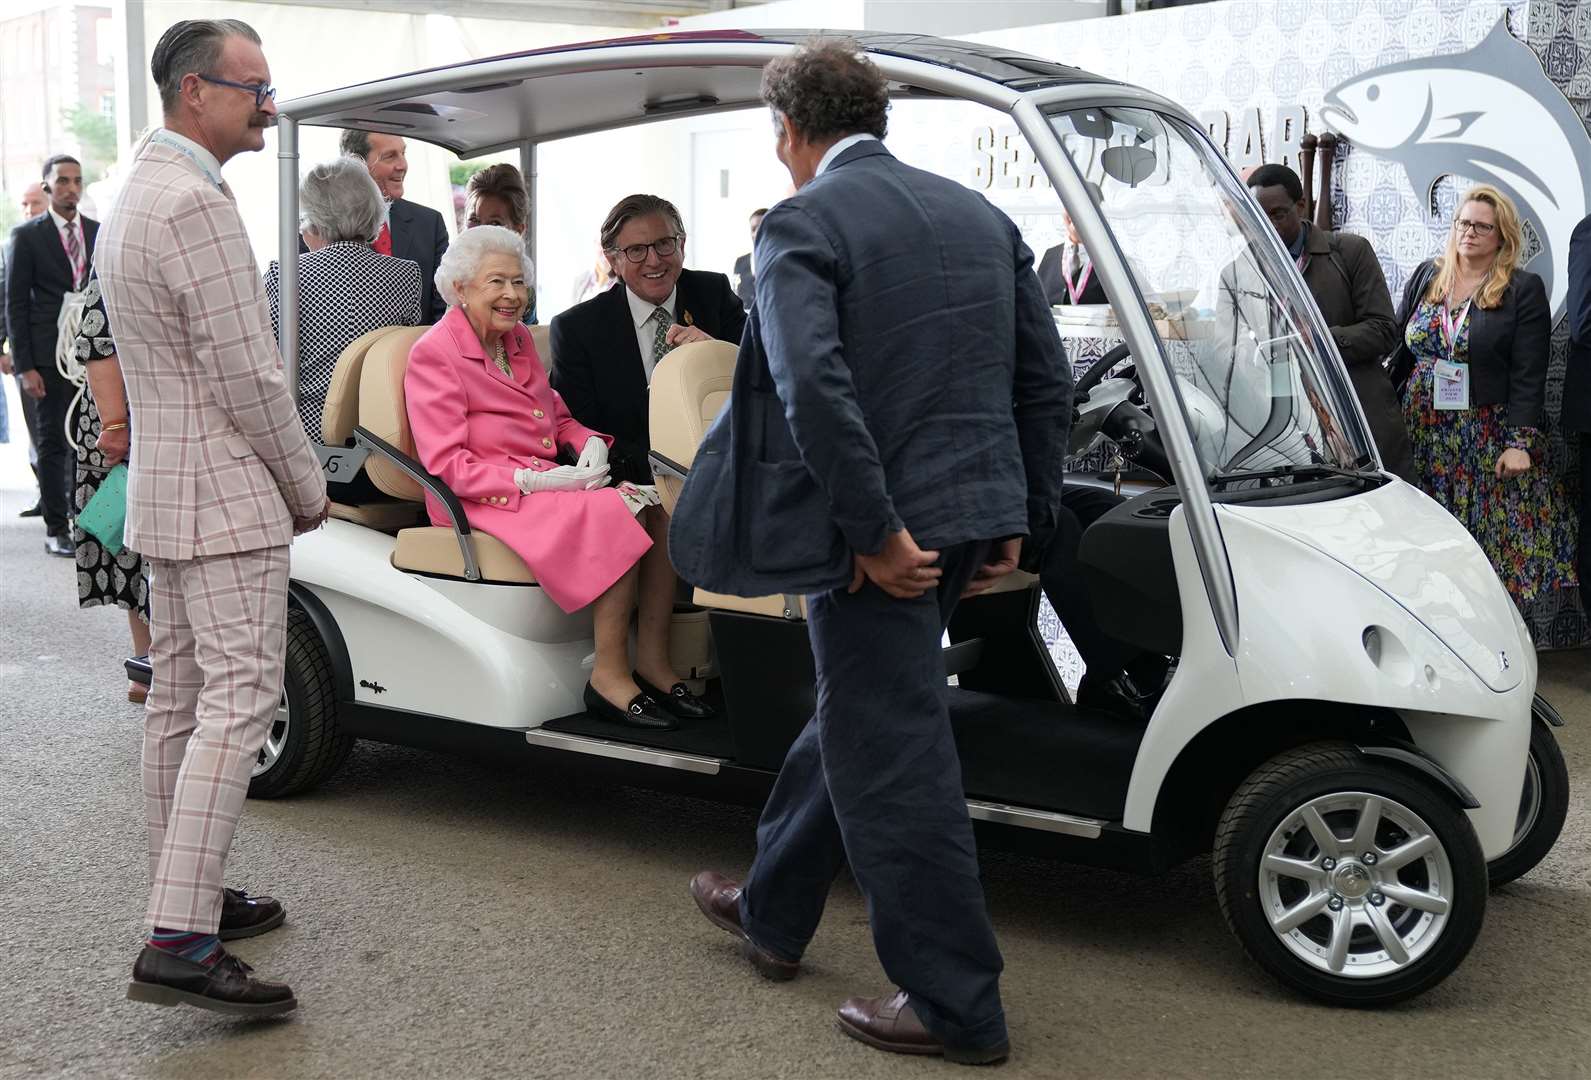 The Queen in a buggy at the Chelsea Flower Show (James Whatling/PA)